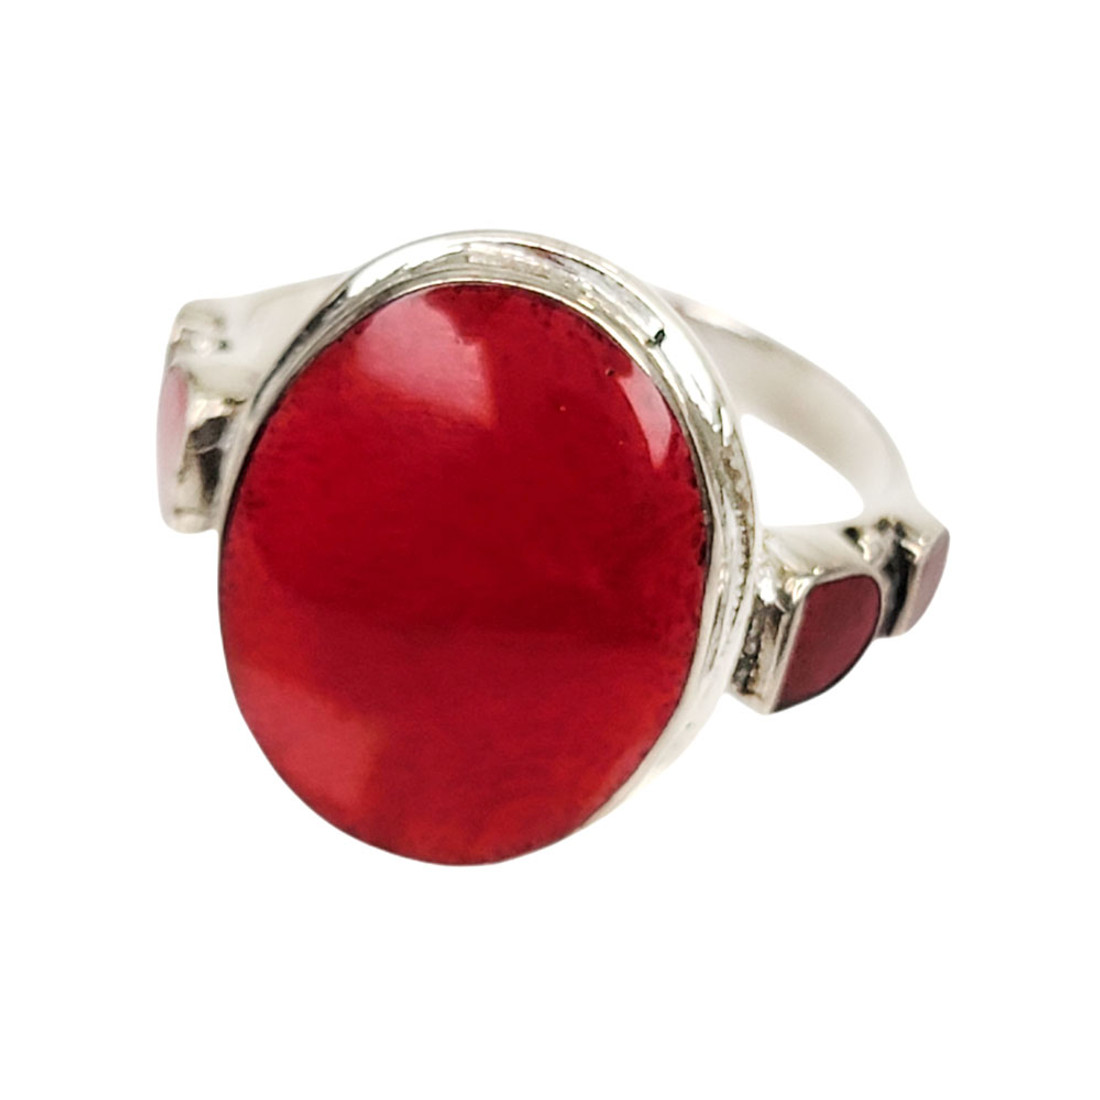 Red Coral sterling silver ring. 